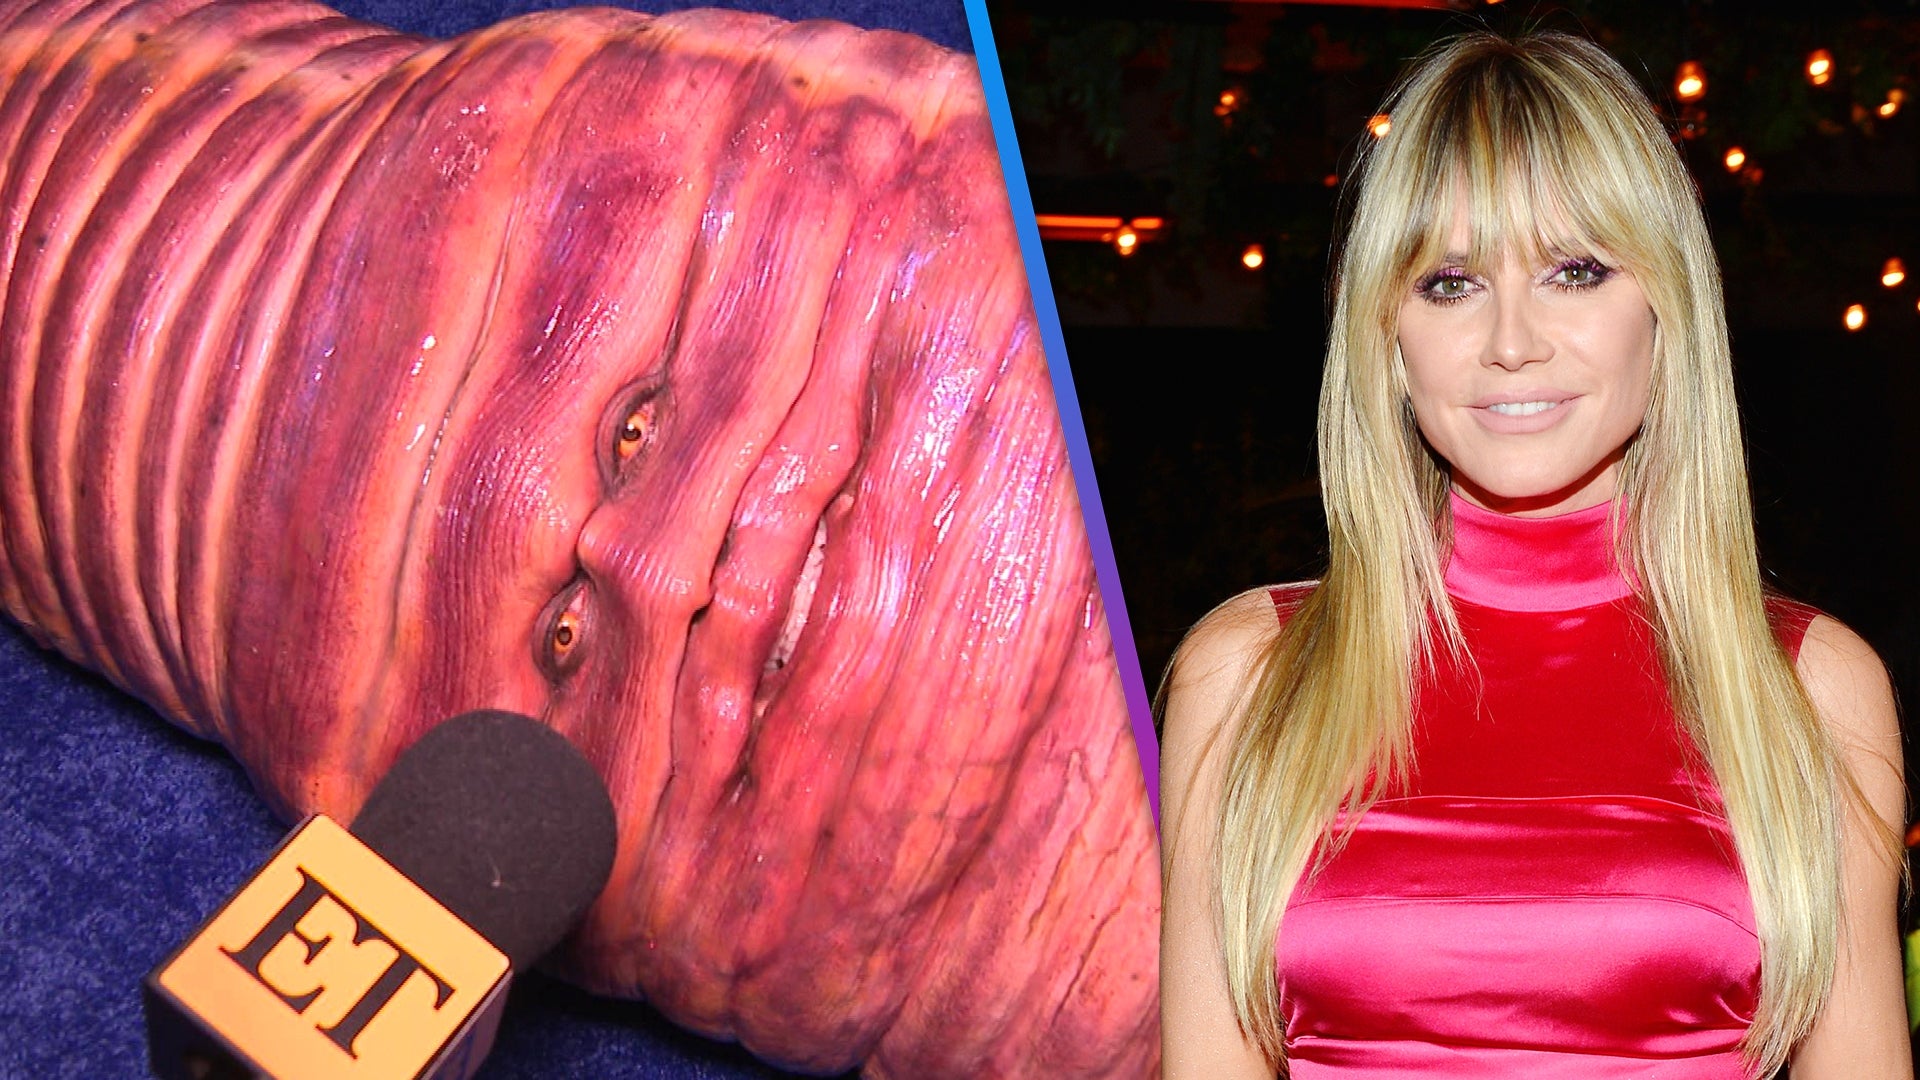 Heidi Klum's Worm Halloween Costume How She Pulled Off the Overthe